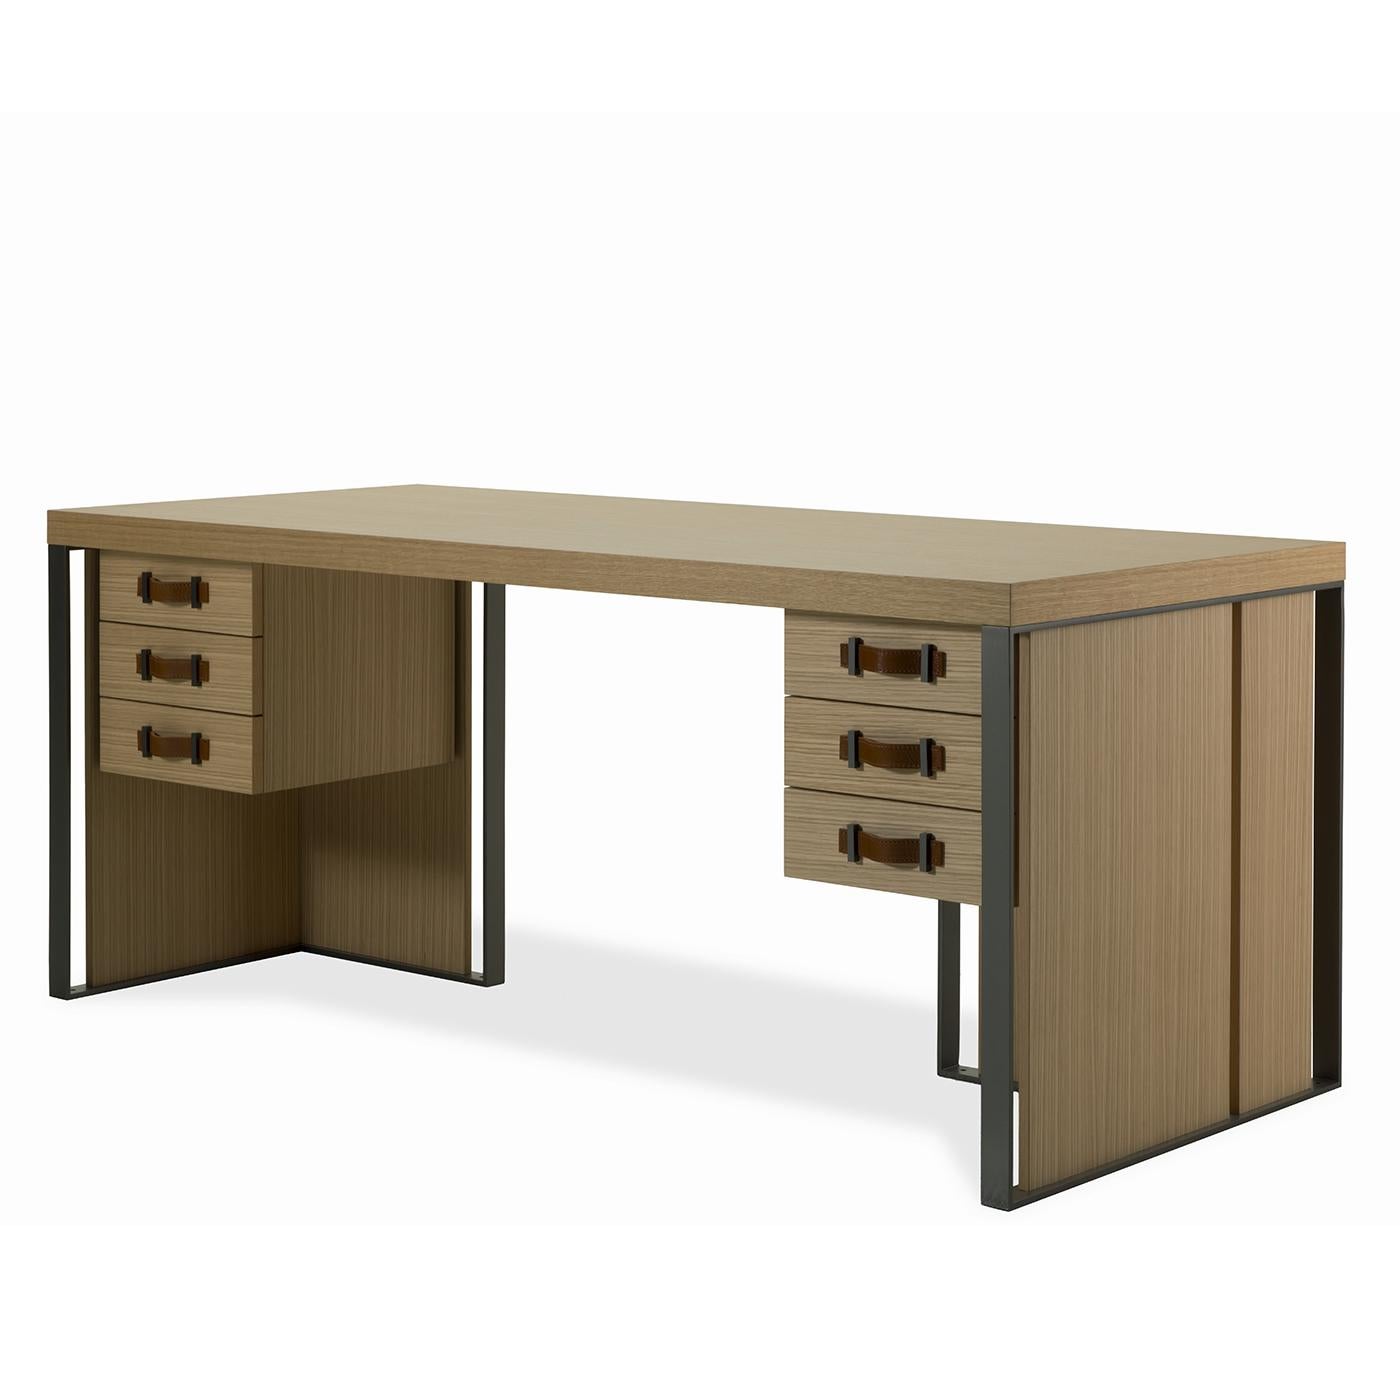 This stunning desk is part of the Kobe collection and will be an ideal addition to a rustic or modern setting. The structure is crafted of wood with a frame in bronzed metal and a top and front panels in wood veneered in durmast (also available in